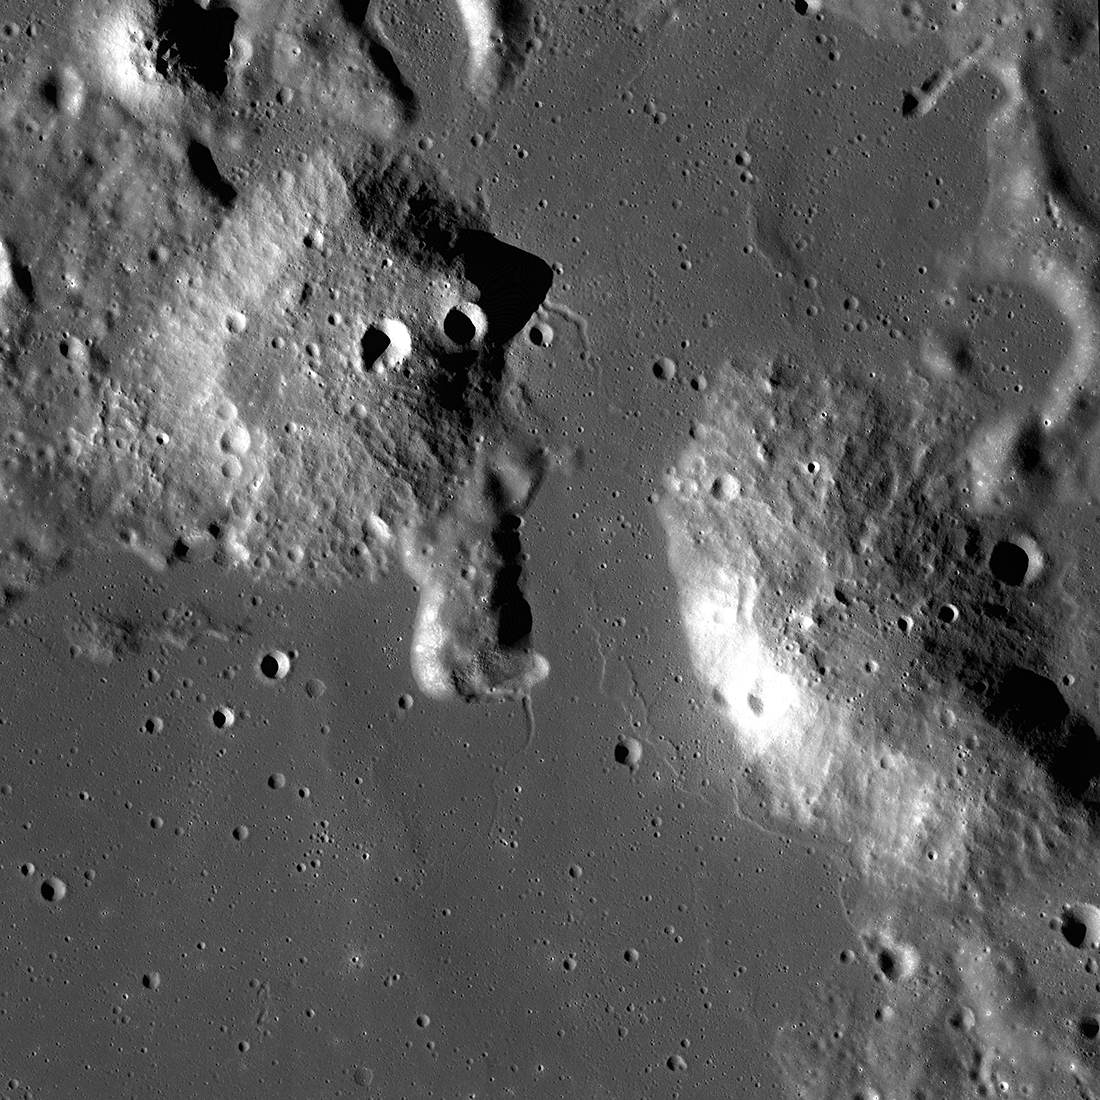 This is an image of the Gruithuisen Domes, taken by the Lunar Reconnaissance Orbiter (LRO). The Gruithuisen Domes protrude outward from the surrounding lunar terrain. The Gruithuisen Domes were formed by eruptions of silicic lavas, which didn't flow outward easily, creating domes.